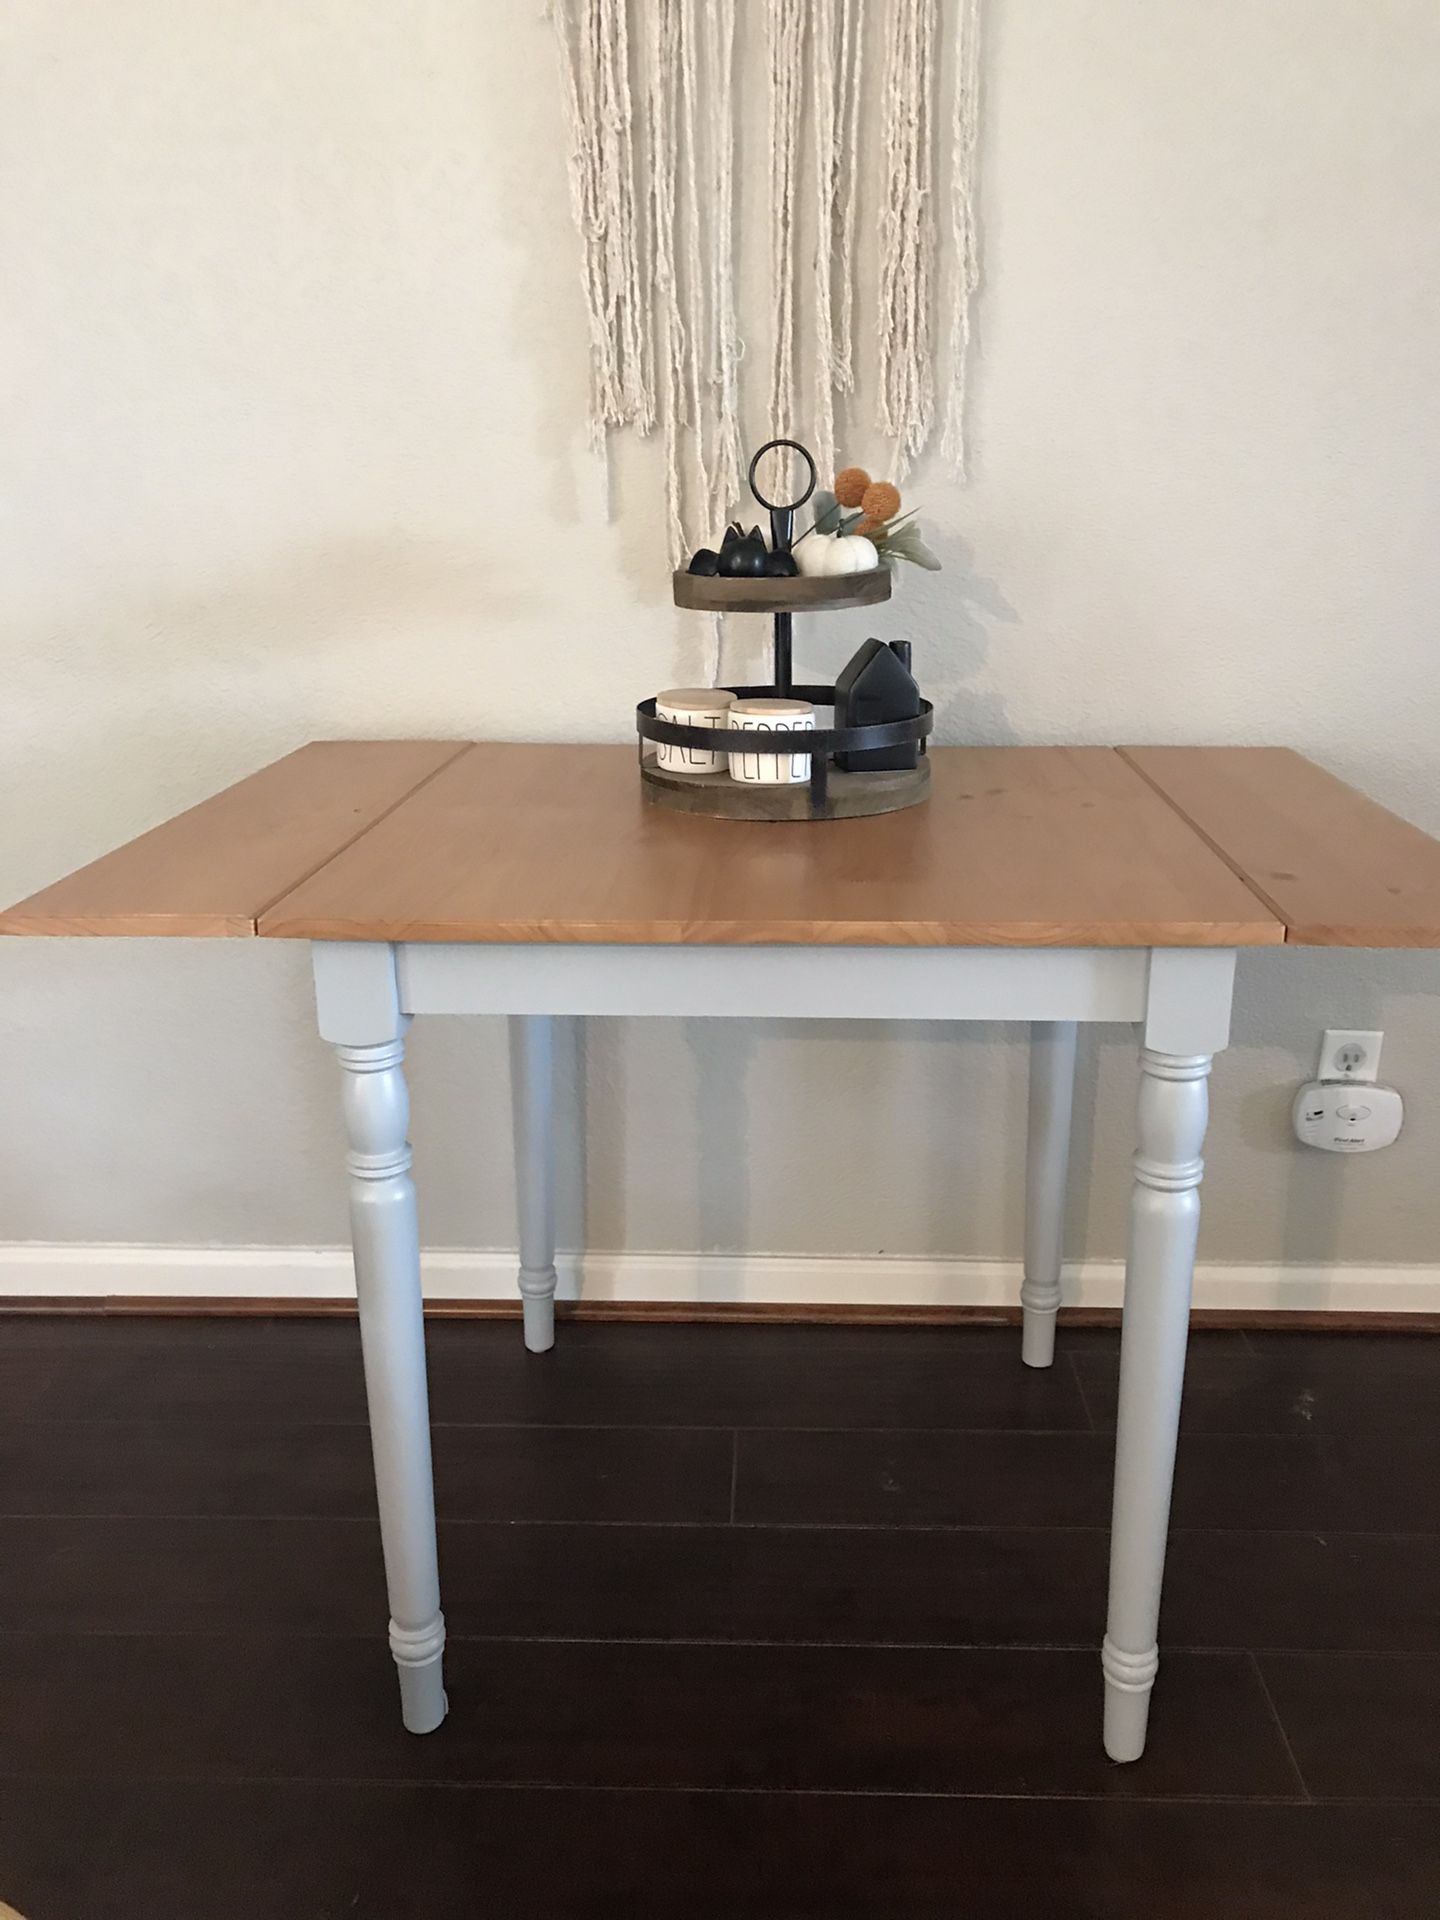 Small dining room table or desk